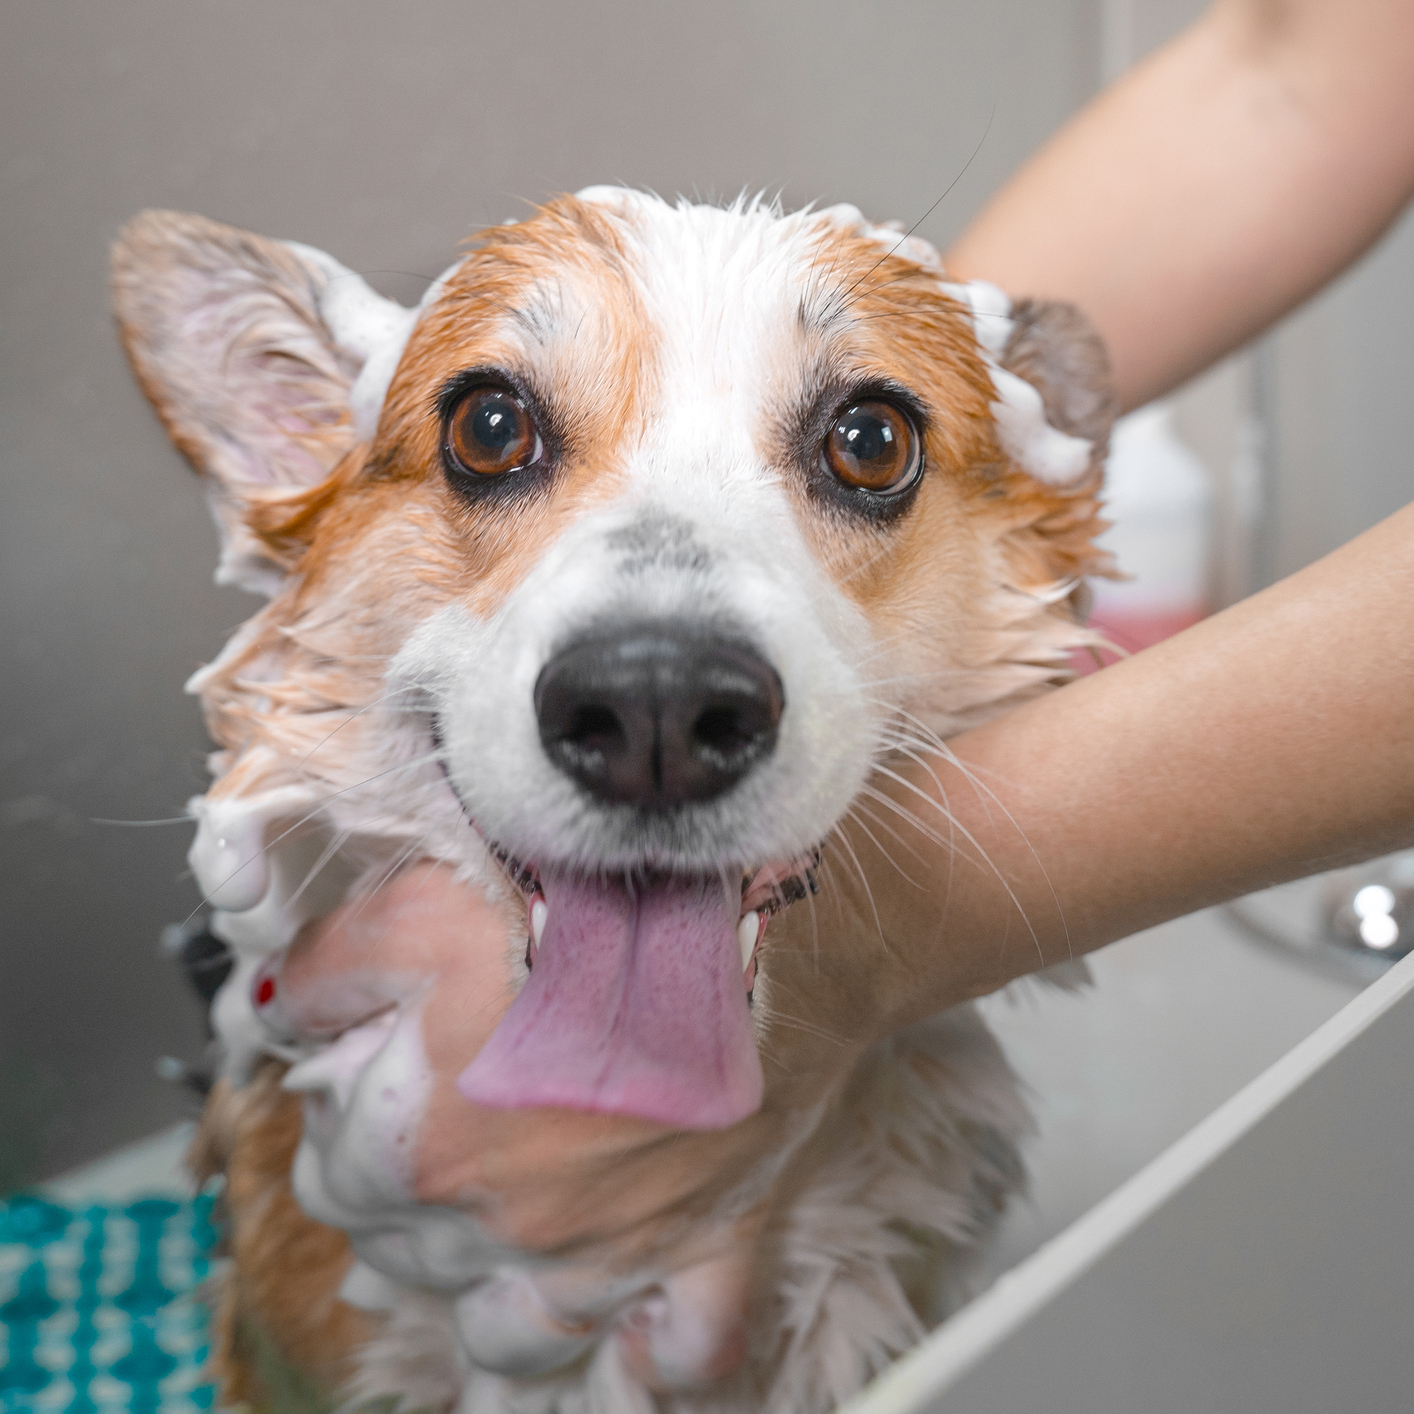 Dog being washed and groomed by a person with gloves.